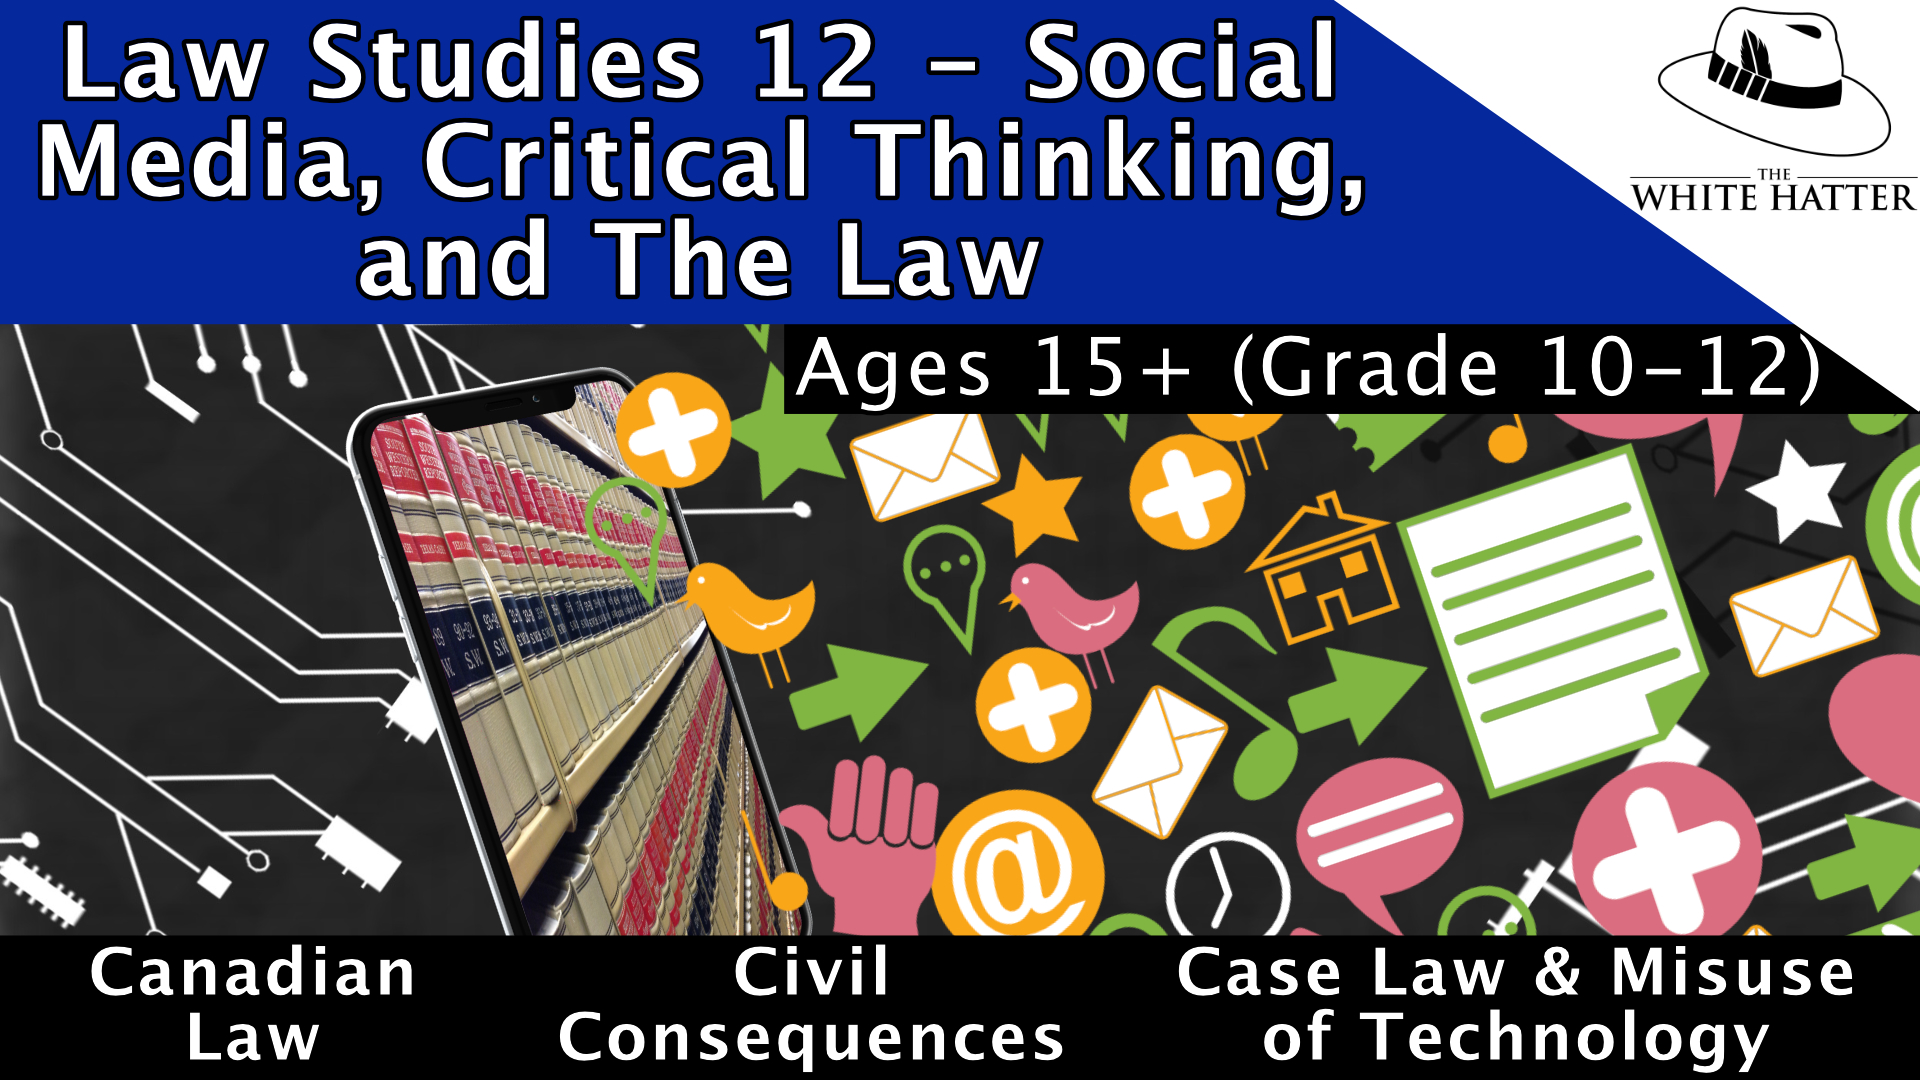 Law Studies 12 - Social Media, Critical Thinking, and The Law